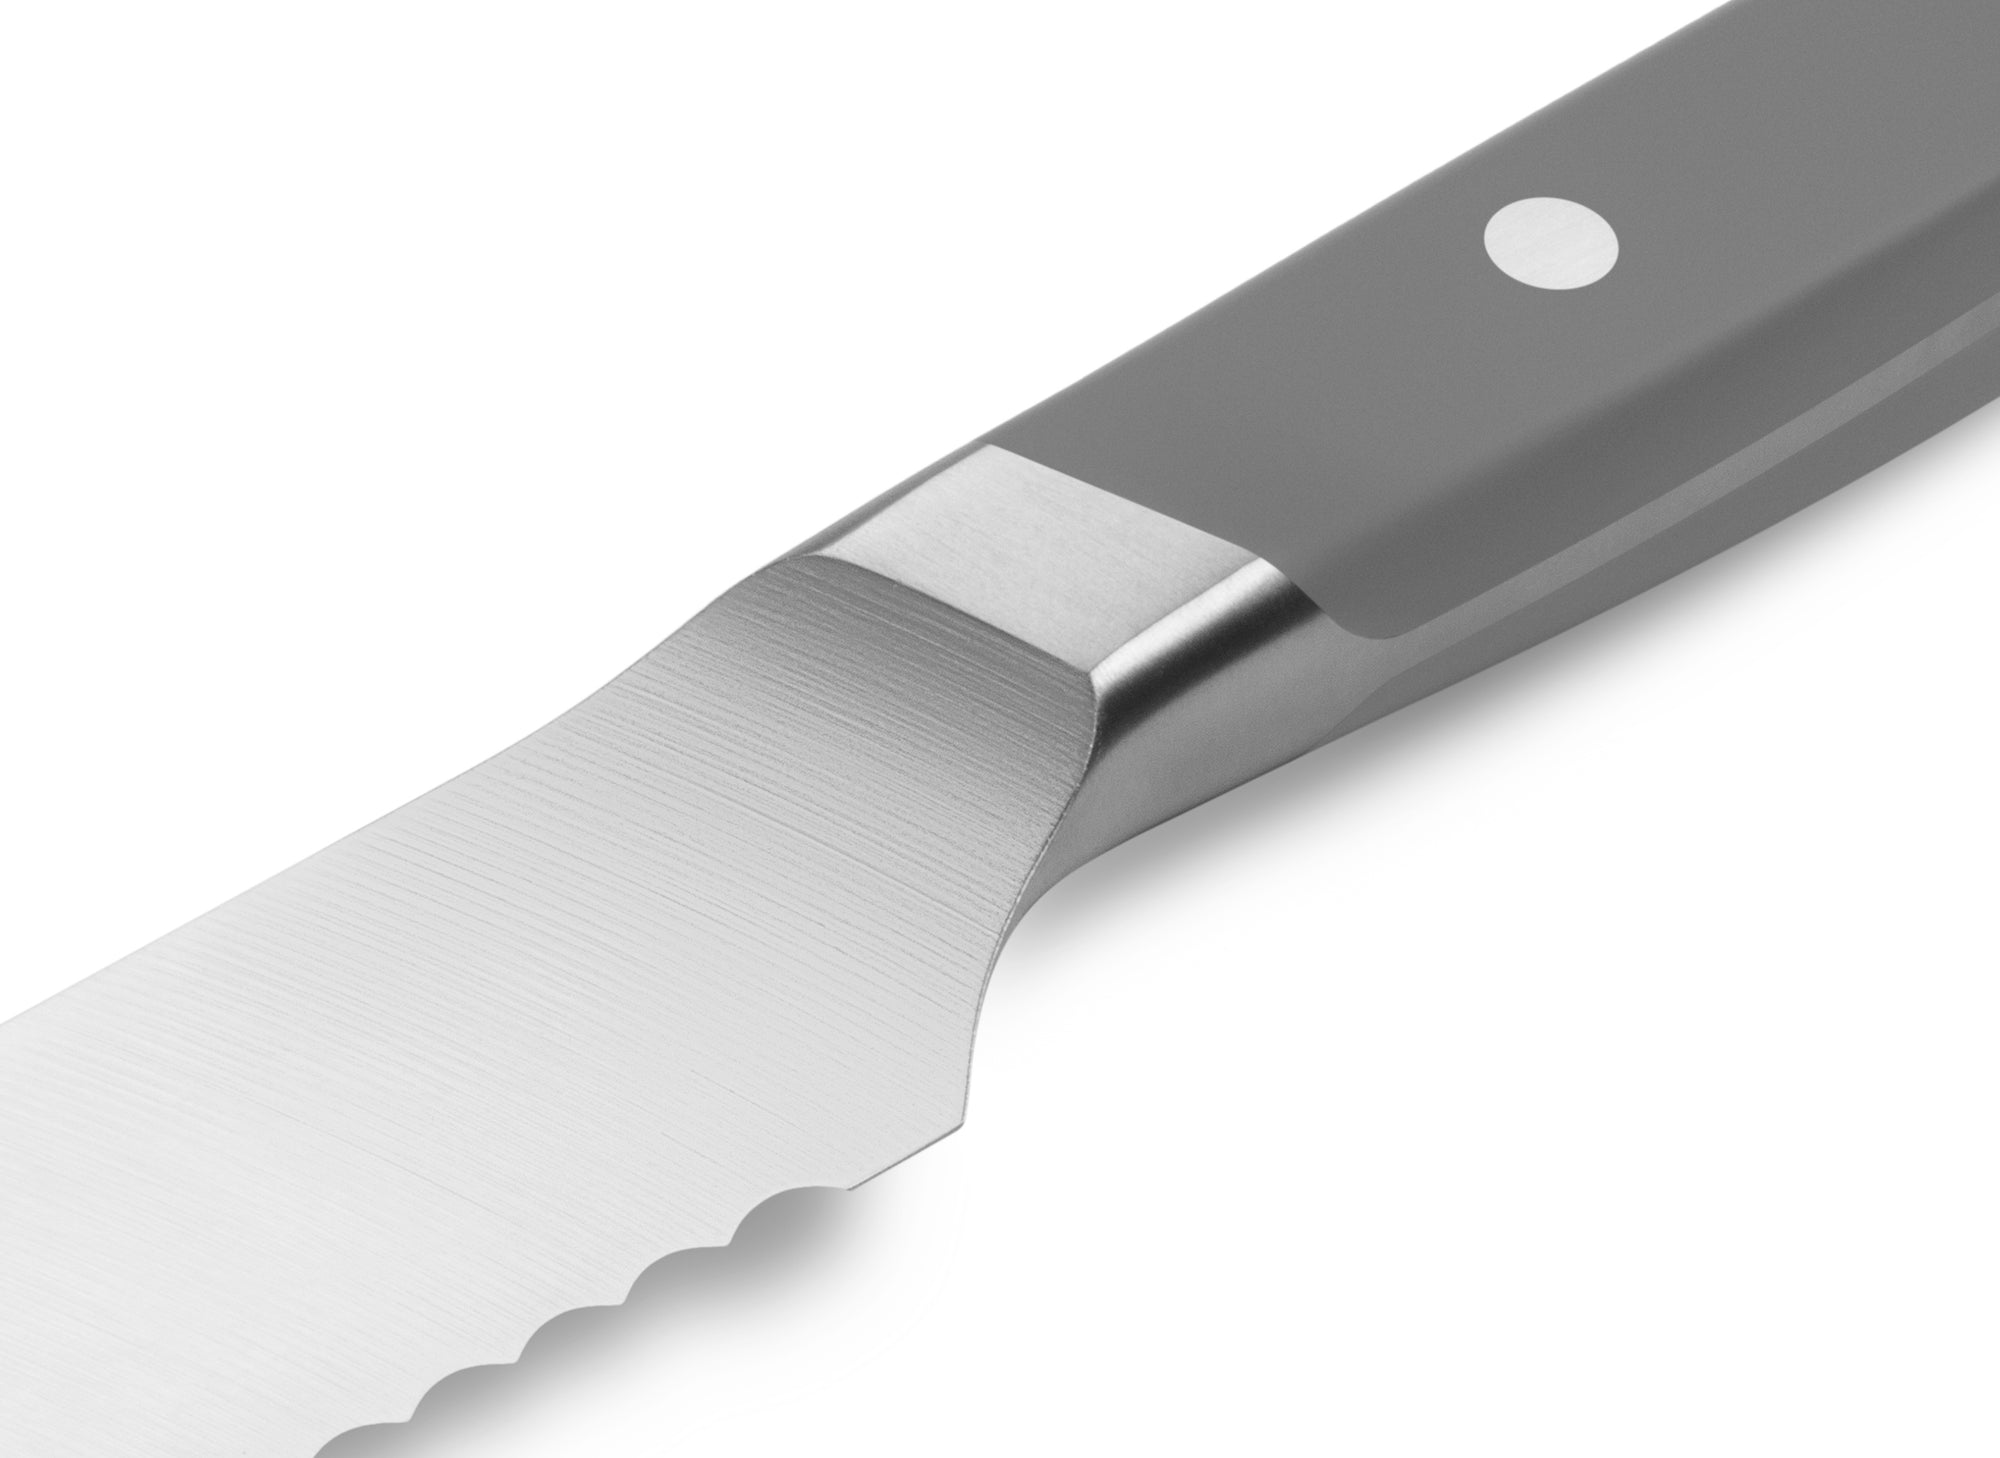 The Misen Serrated Knife in gray features a unique sloped bolster.